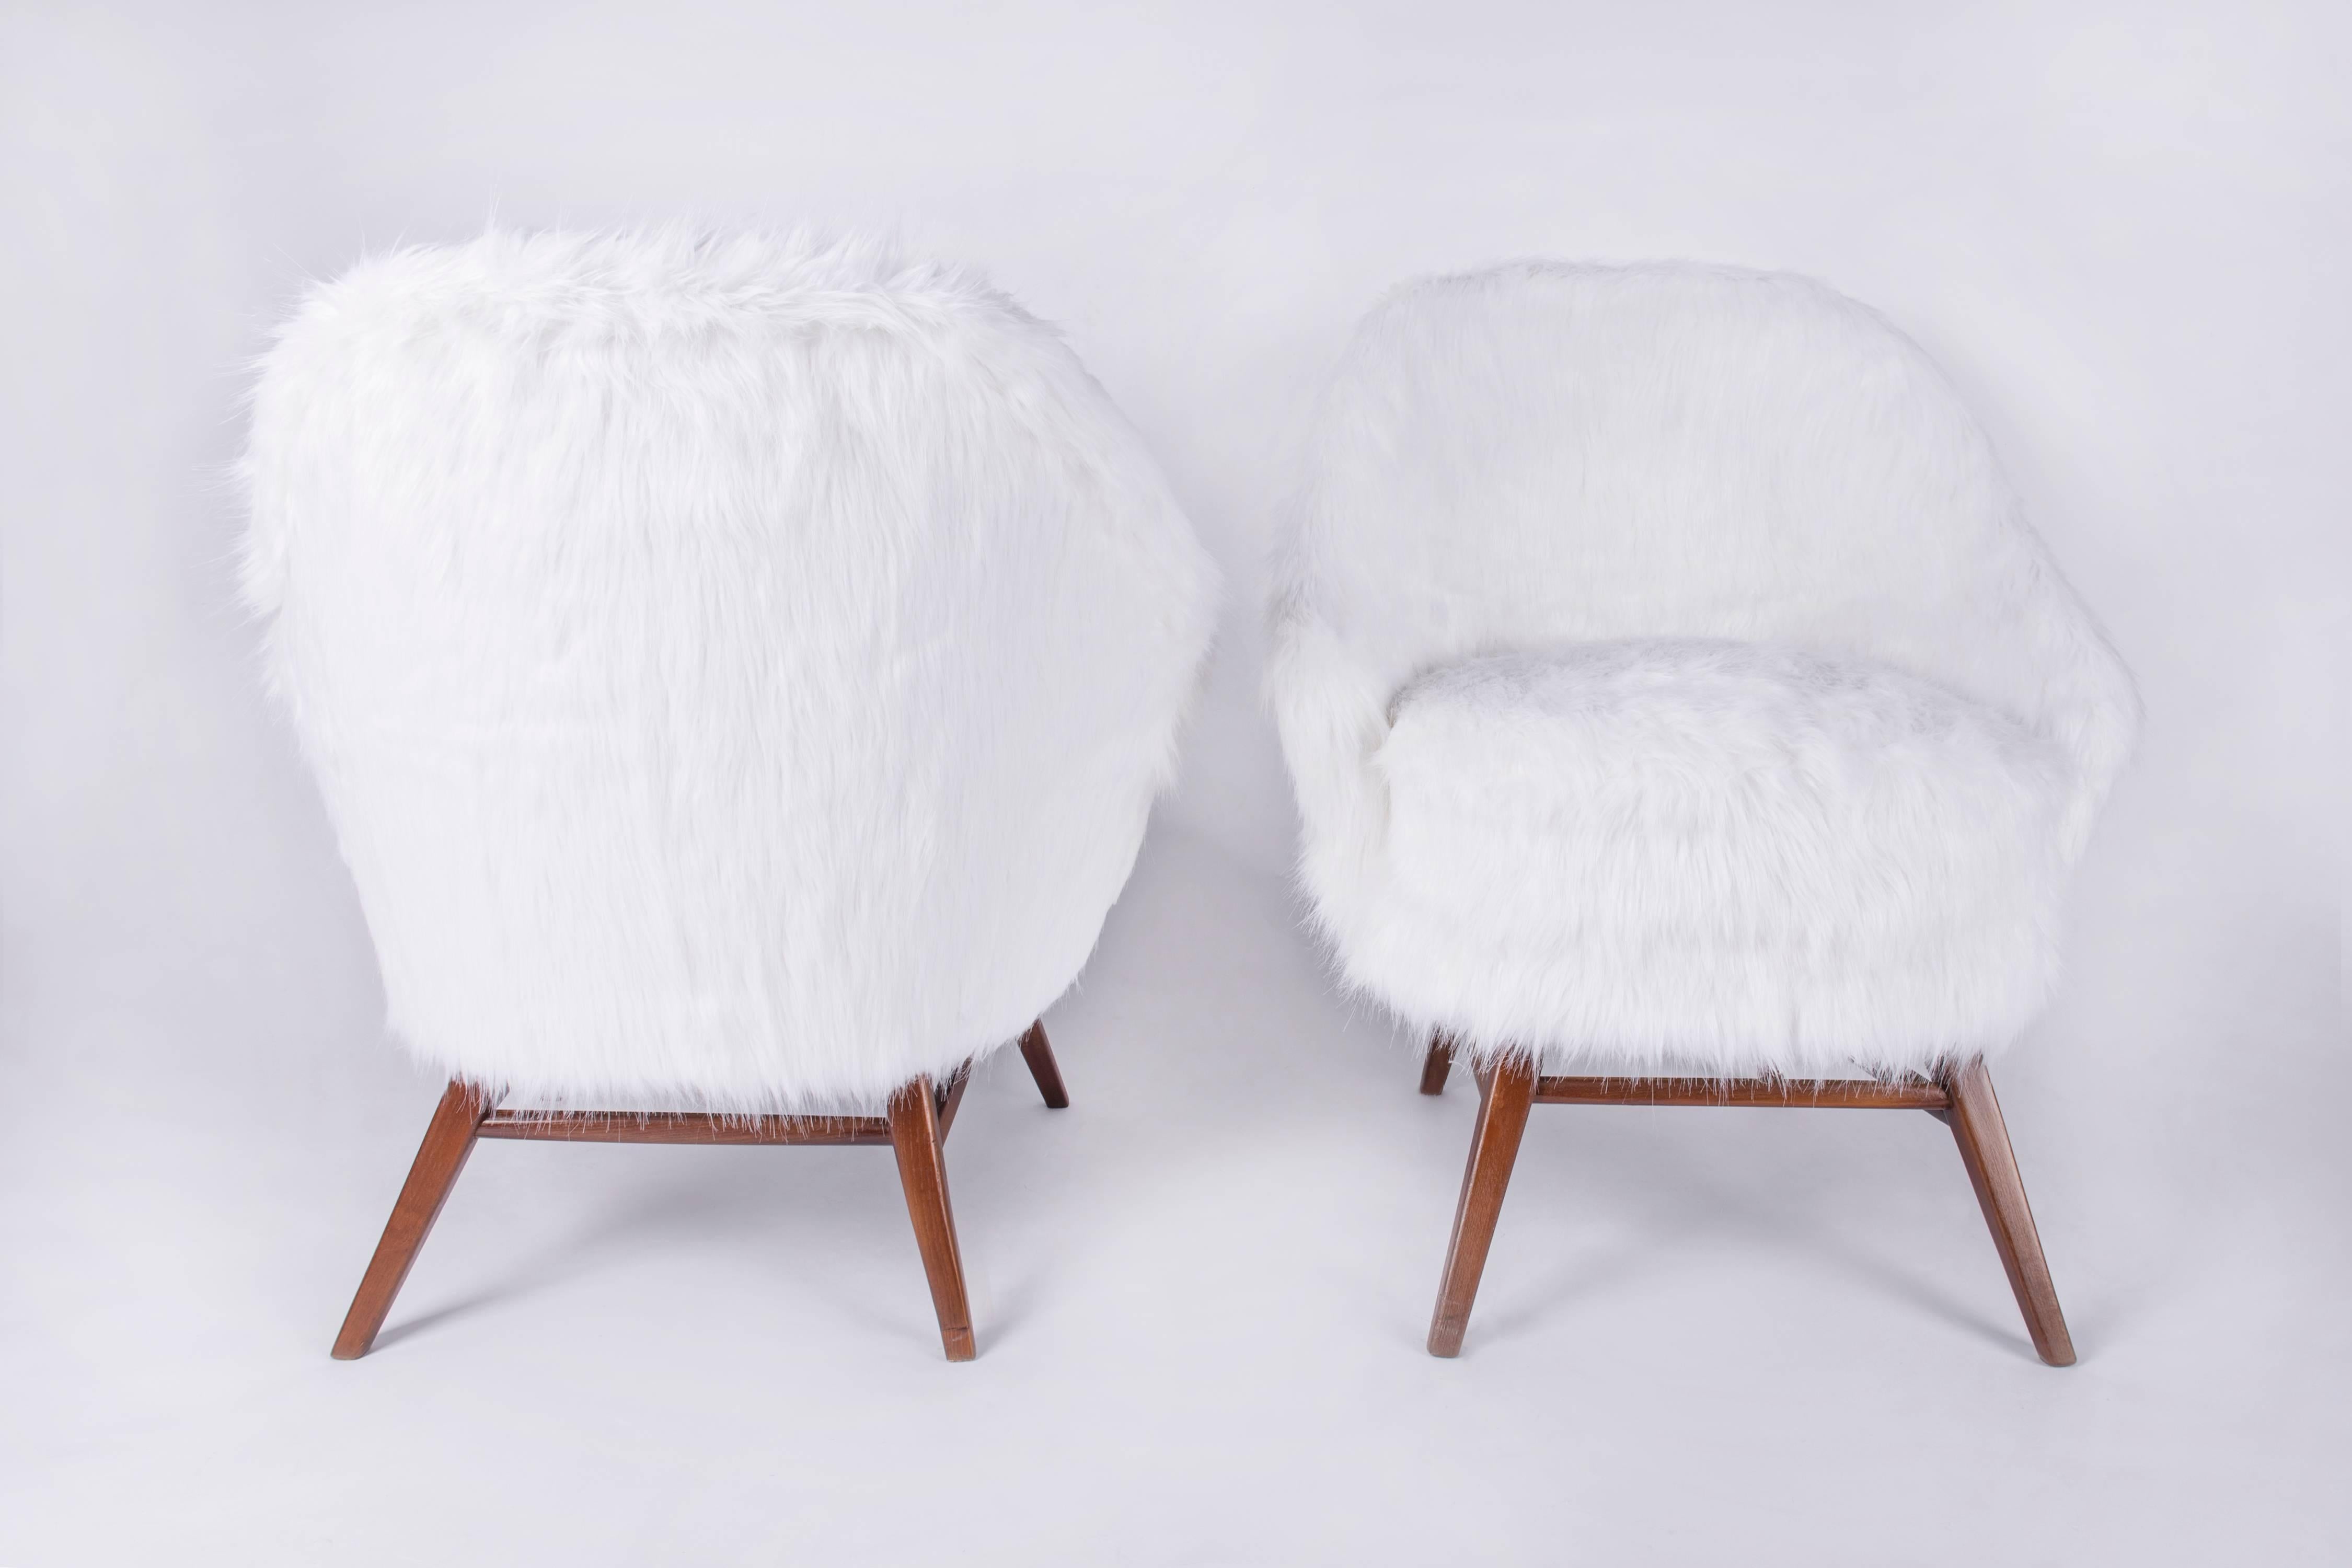 Pair of Mid-Century Modern armchairs, fully restored. The chairs were re furbished, completely re upholstered with a white long hair faux fur. The wooden structure was repolished. The cussins are with springs. Perfect comfort. An ideal piece to be